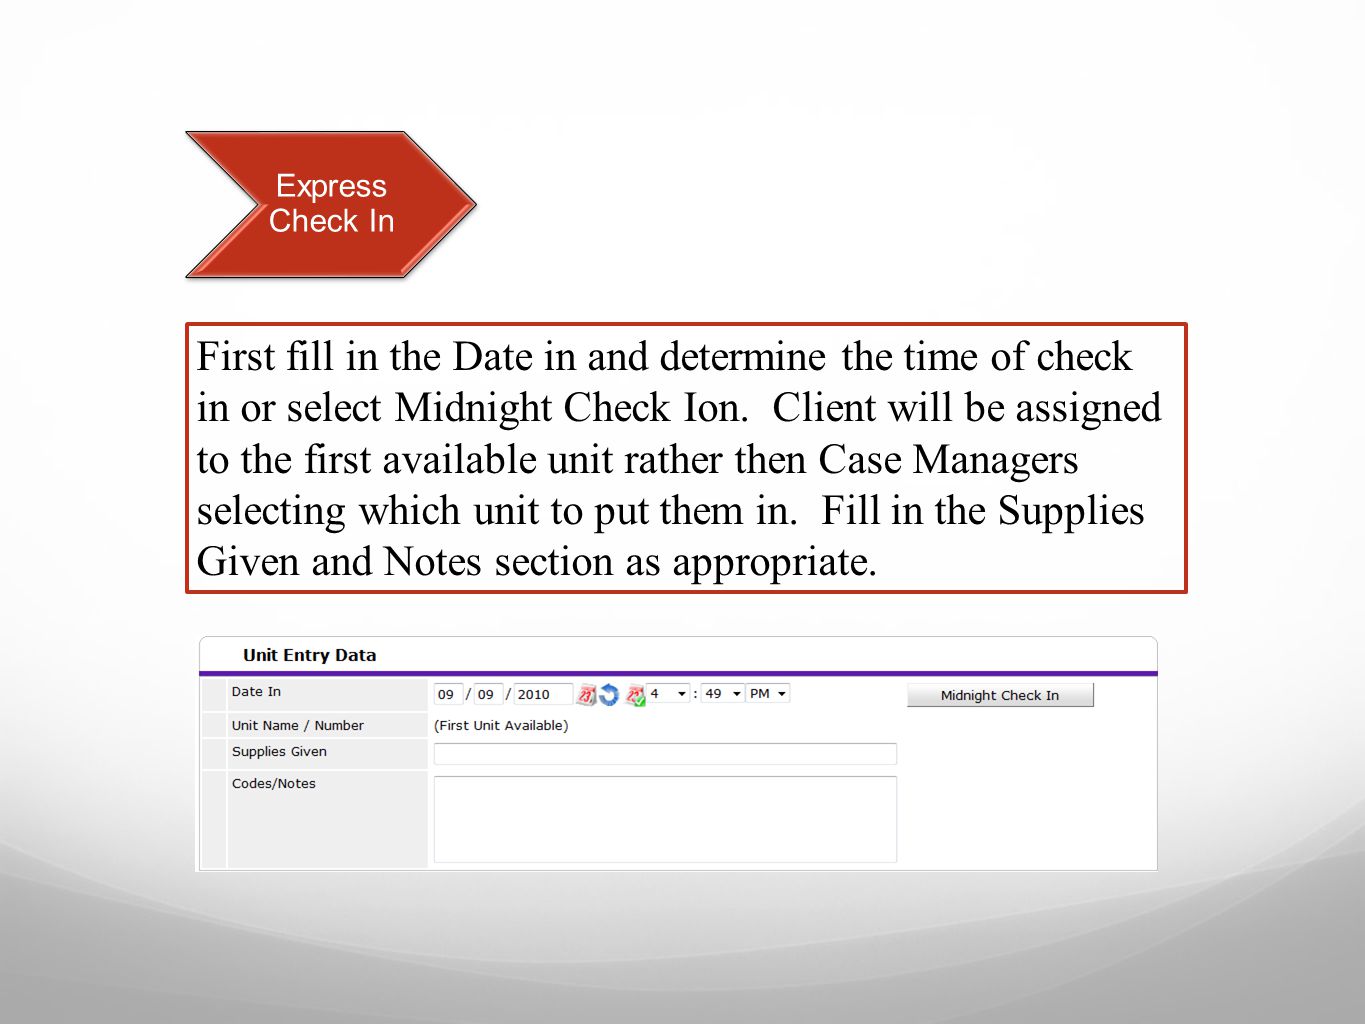 Express Check In First fill in the Date in and determine the time of check in or select Midnight Check Ion.